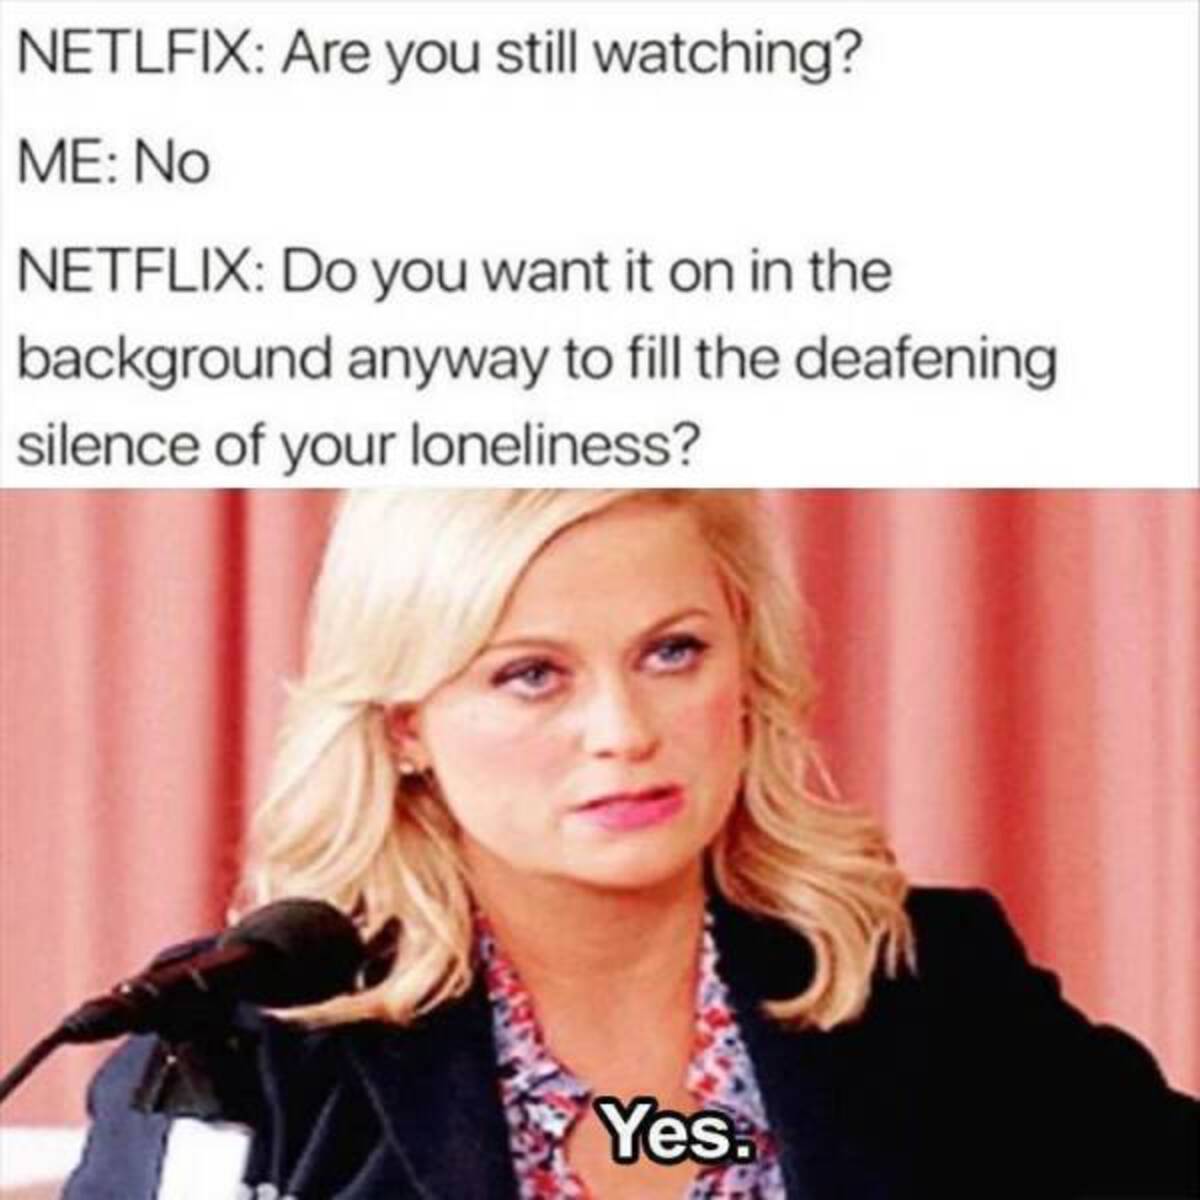 blond - Netlfix Are you still watching? Me No Netflix Do you want it on in the background anyway to fill the deafening silence of your loneliness? Yes.